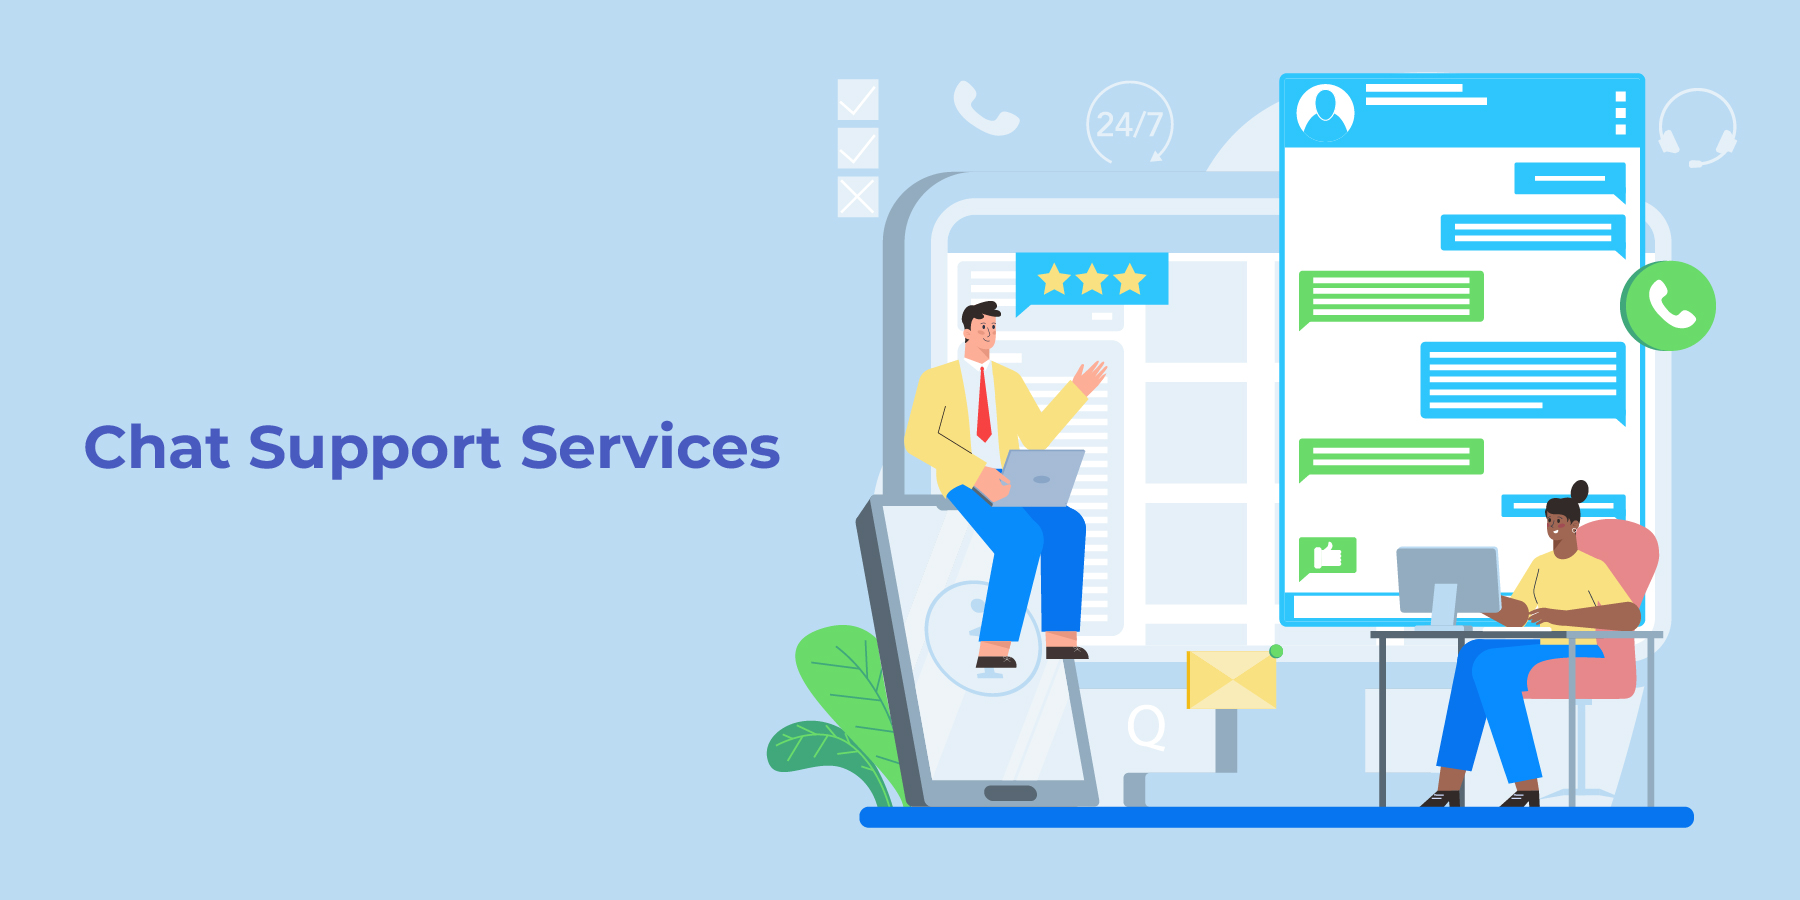 Chat Support Services